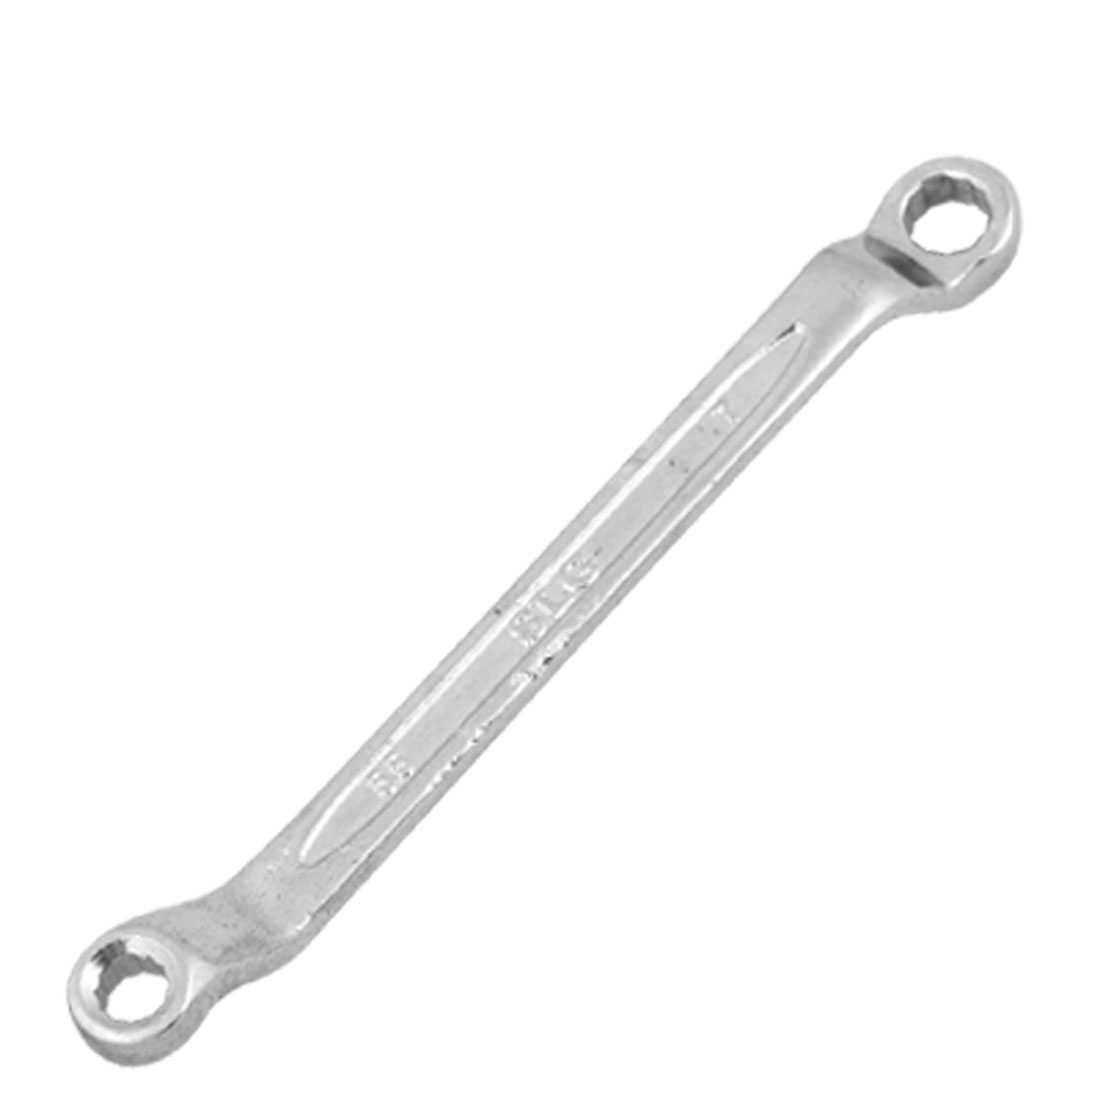 Unique Bargains 5.5mm 7mm 12 Point Double Ended Metric Box Spanner Tool